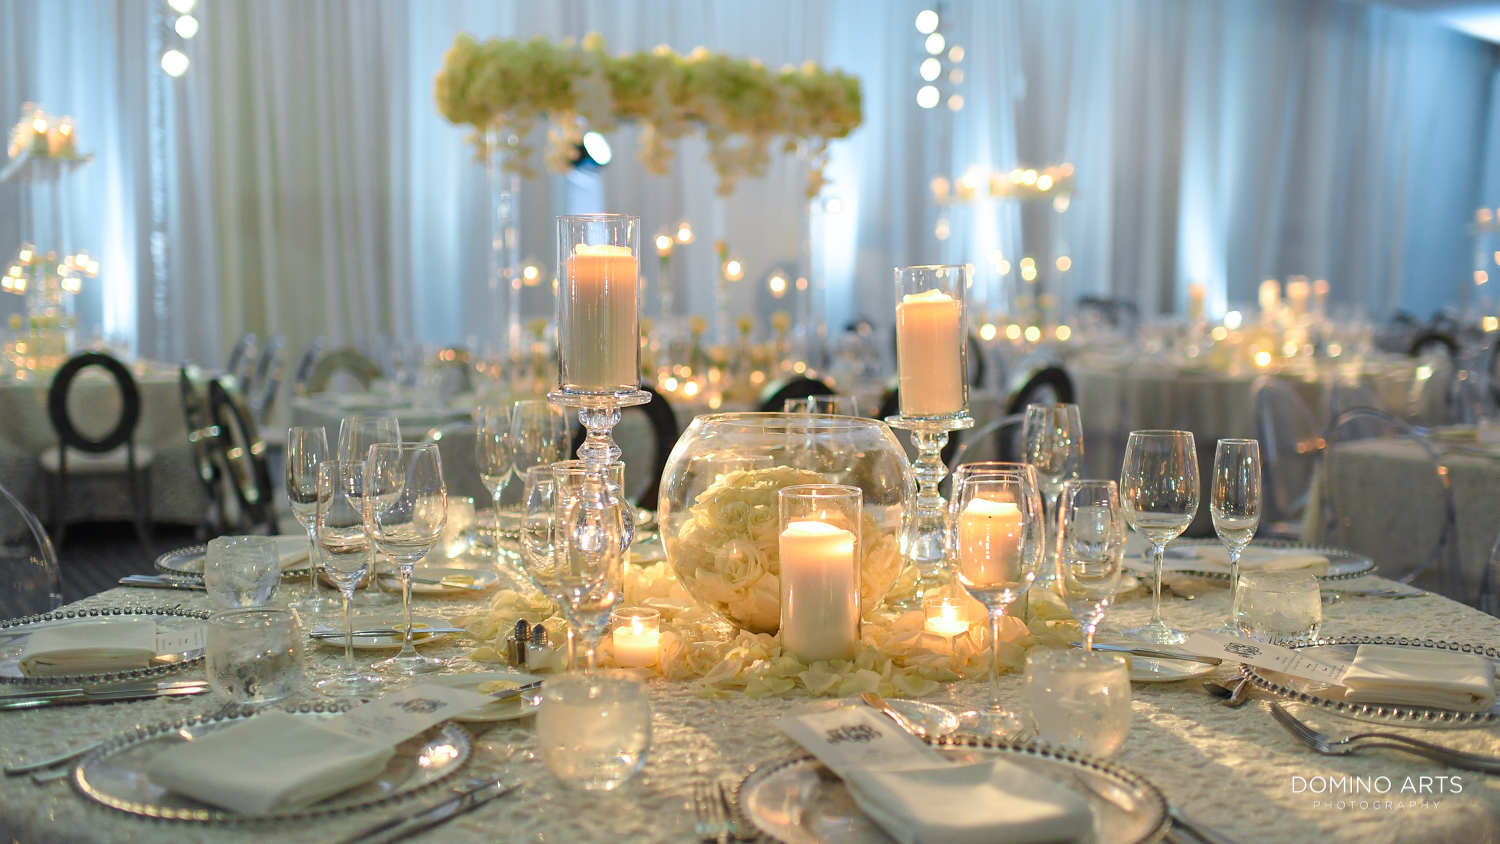 luxury candles and flowers wedding decor pictures at fontainebleau miami